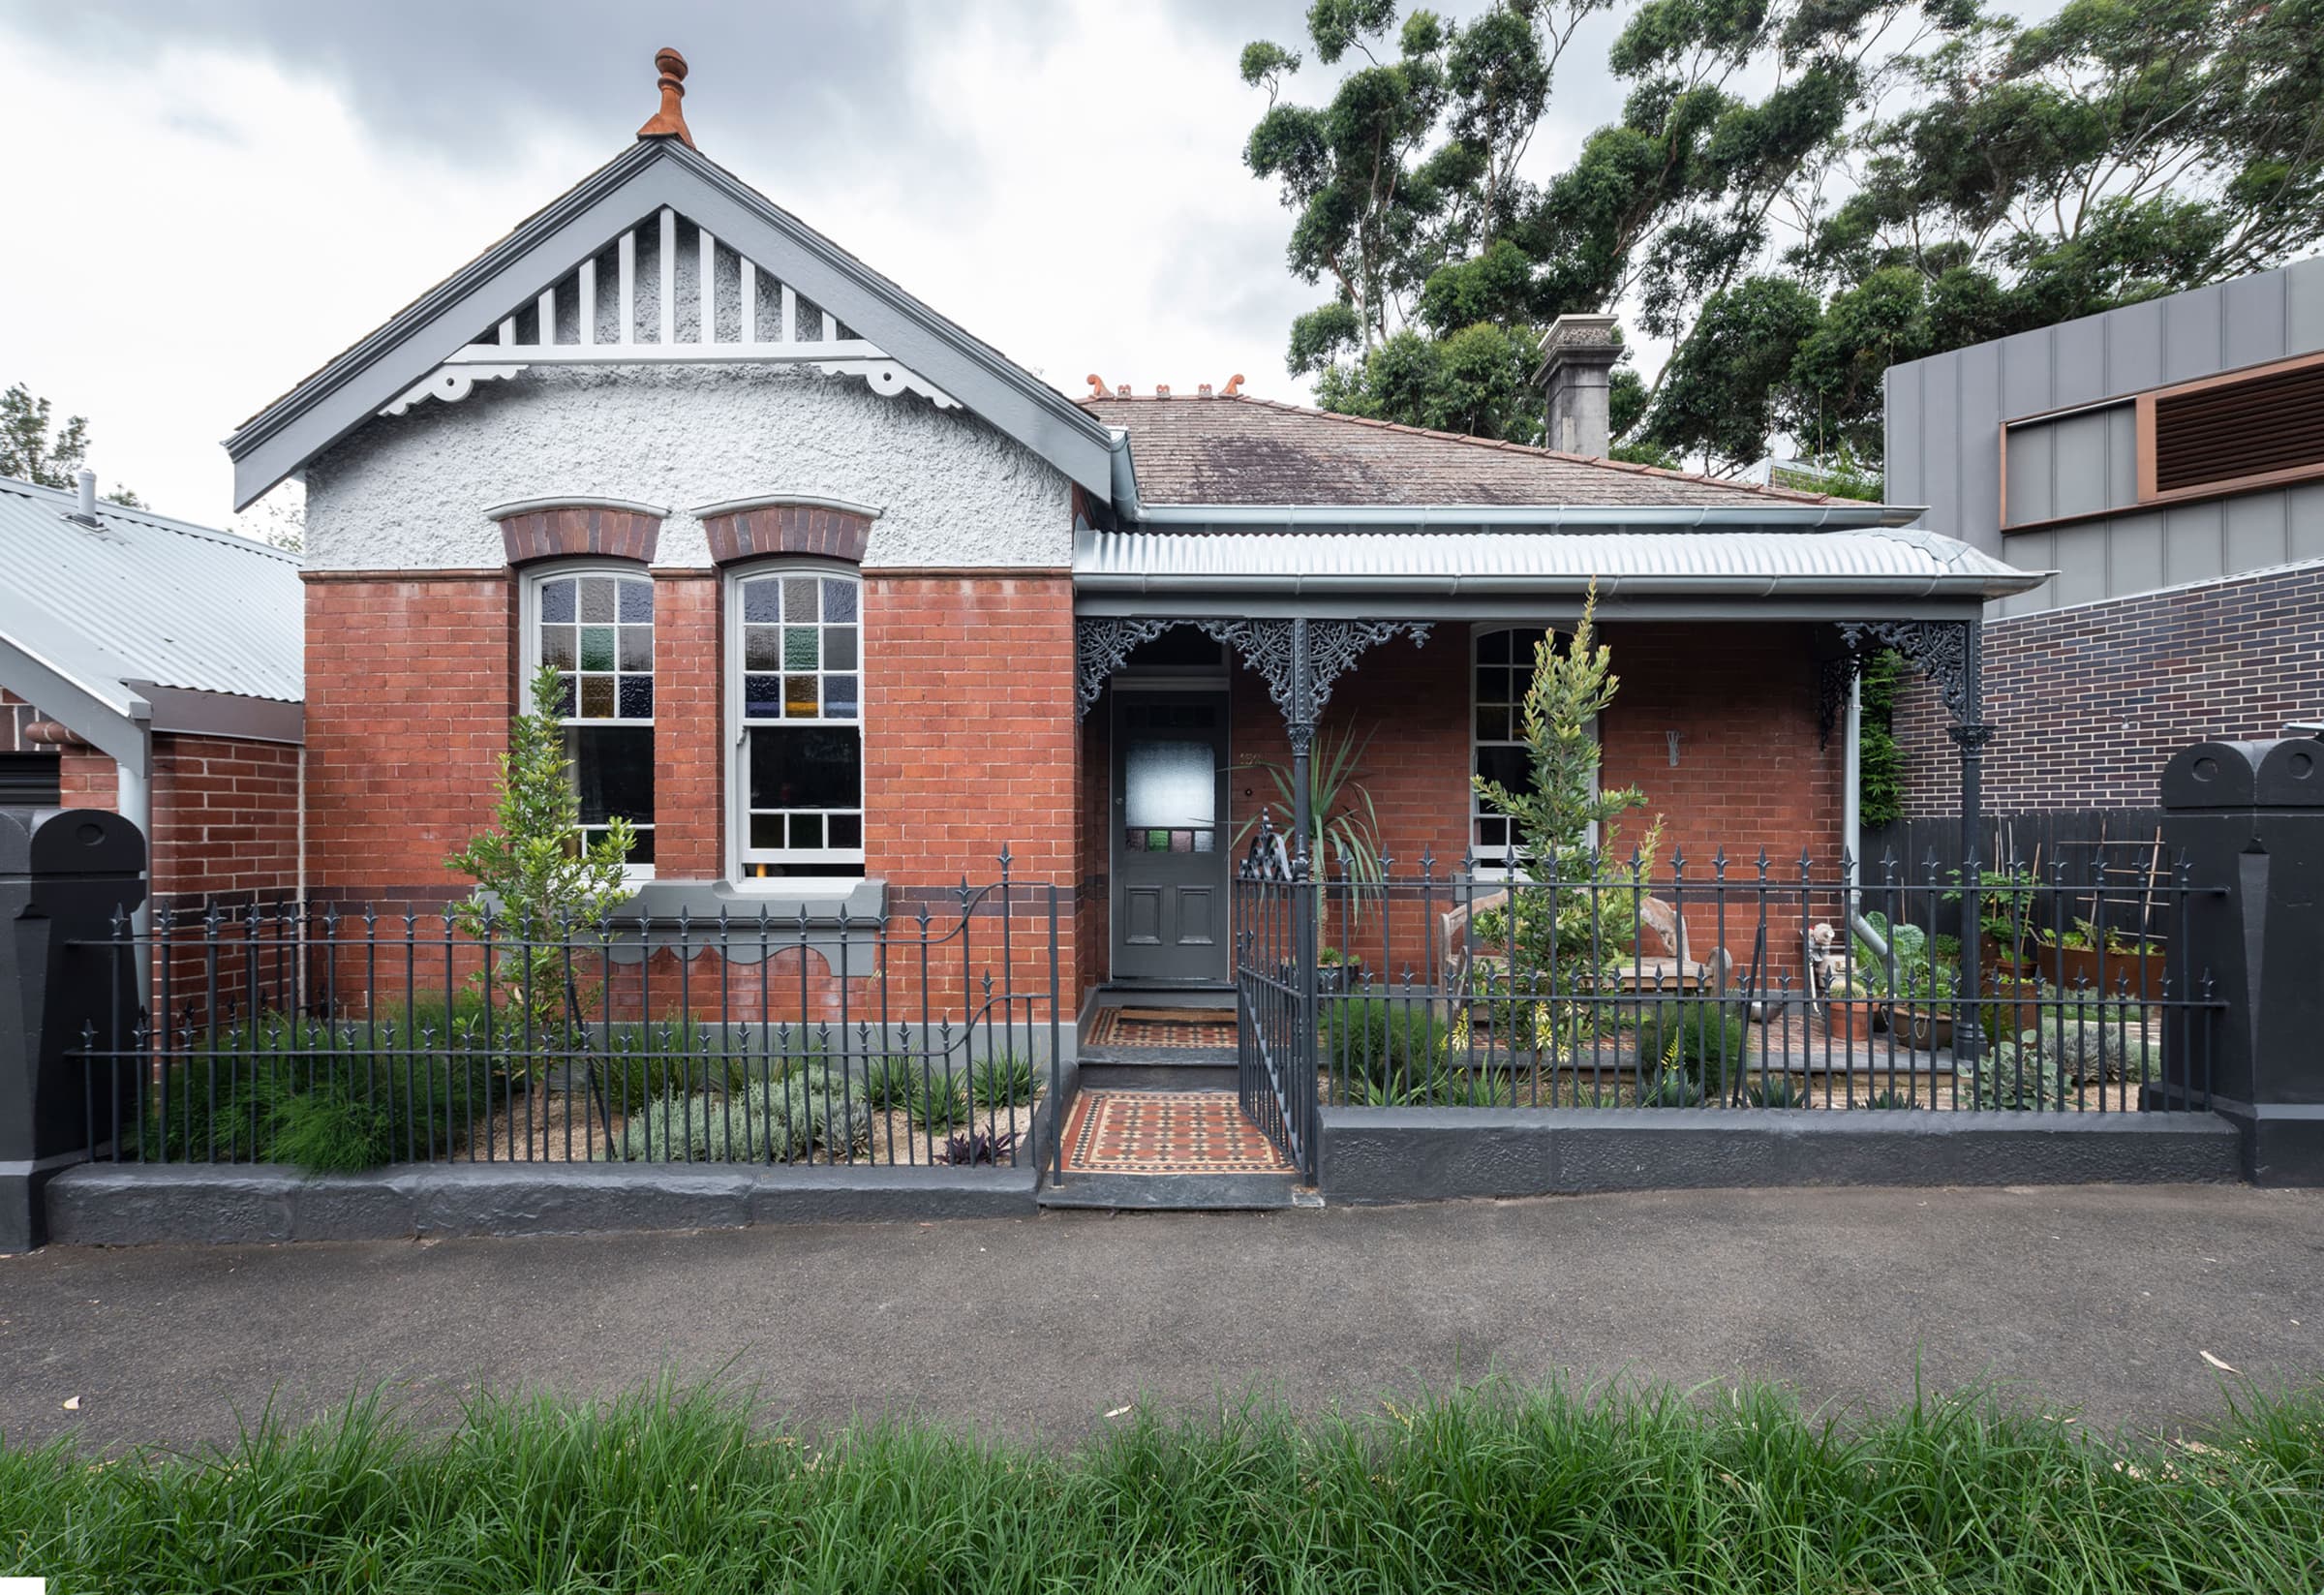 Exterior view of a typical Victorian house in Australia